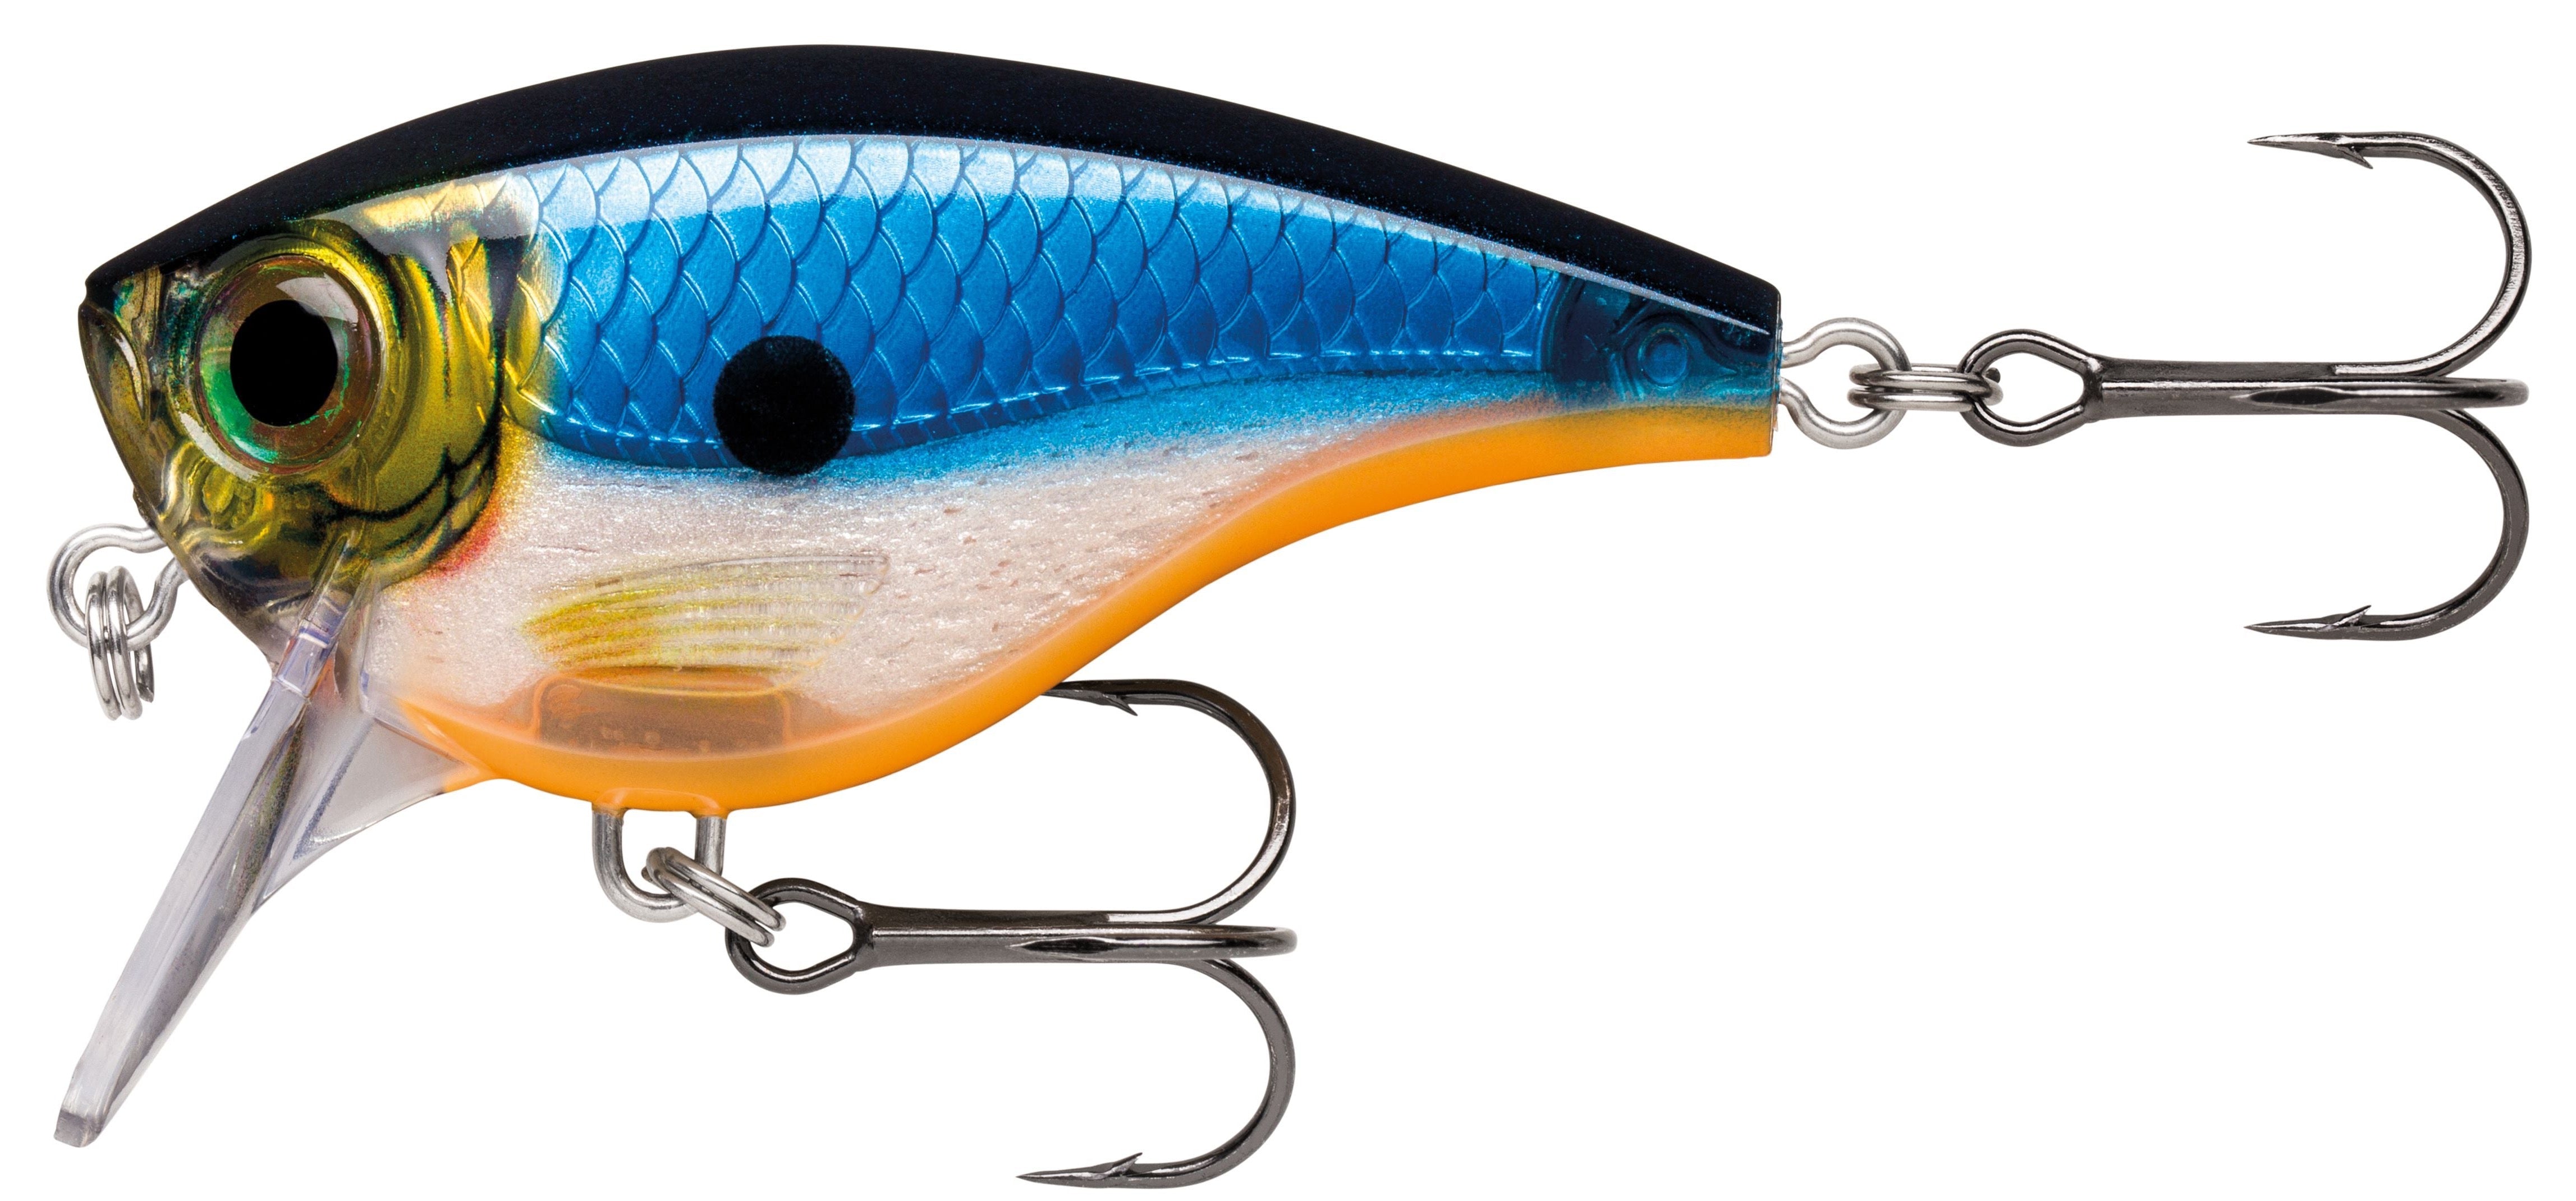 Canne Casting Smith Troutin'Spin 53 L - Magasin de pêche Just-Fishing